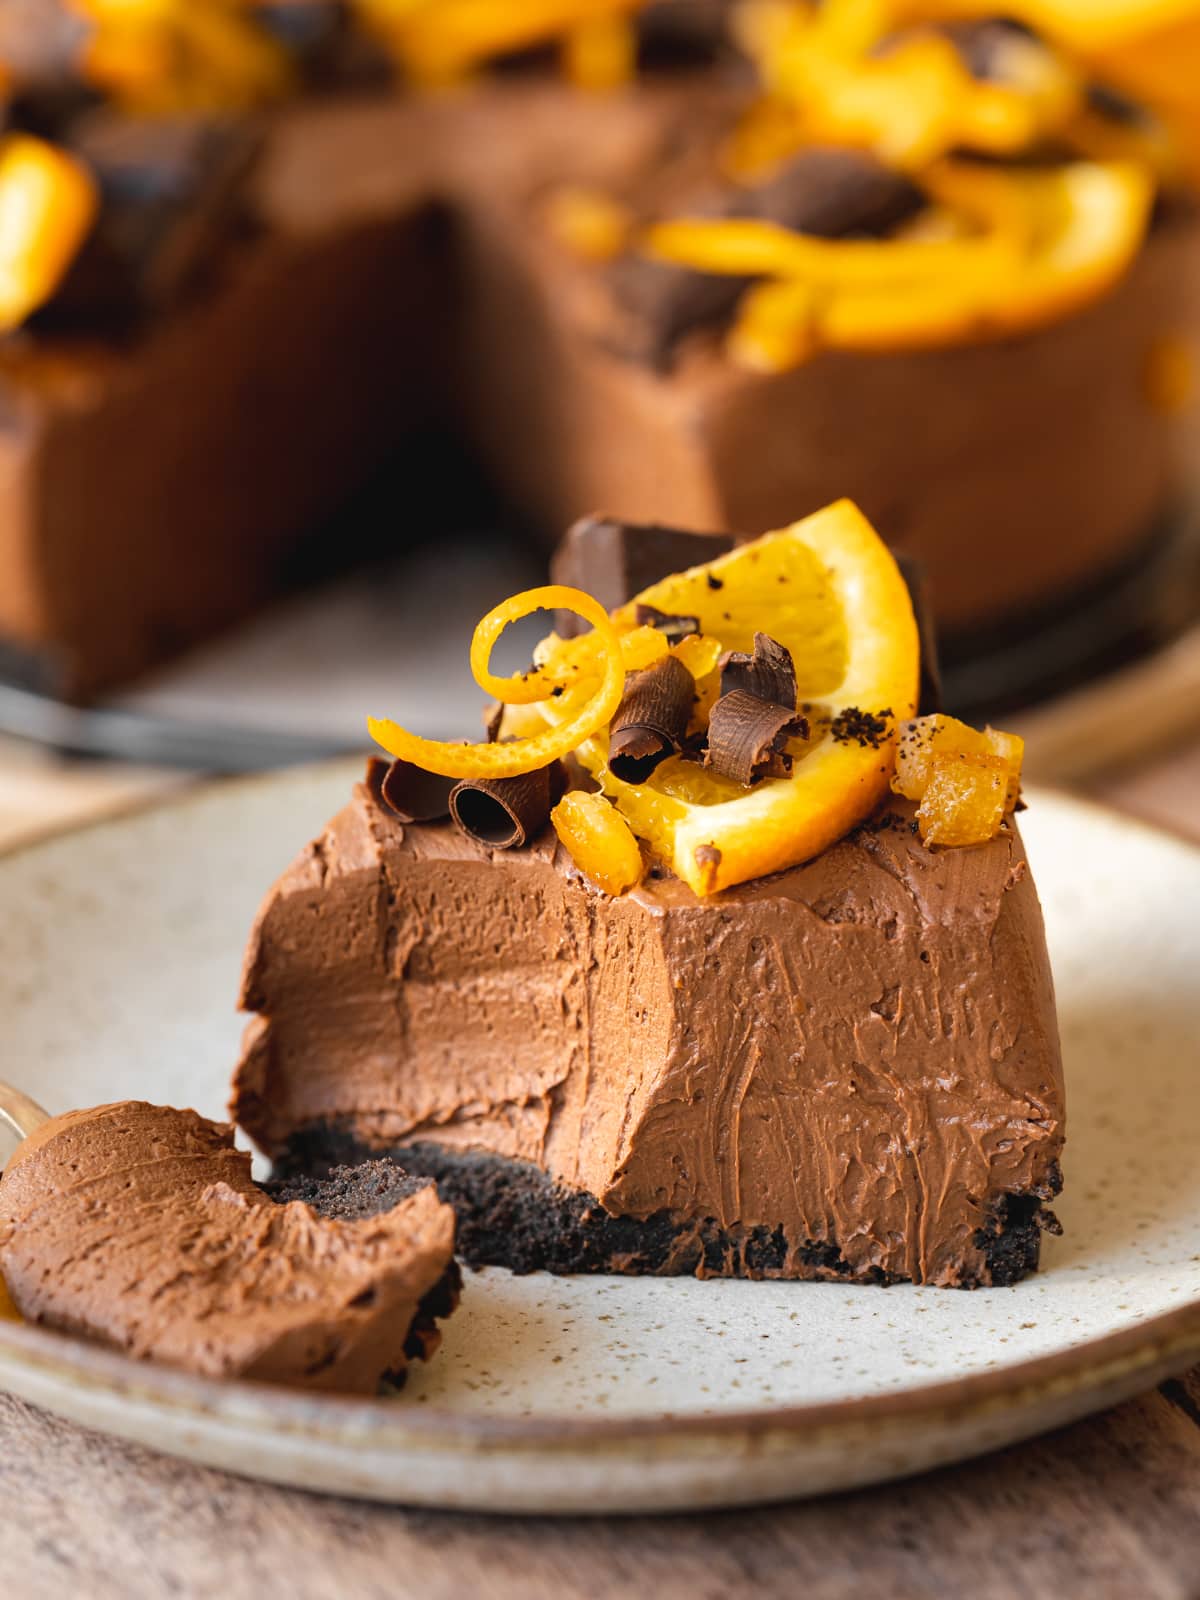 Slice of no-bake vegan chocolate orange cheesecake on a speckled plate with a gold fork taking a bite out of it.